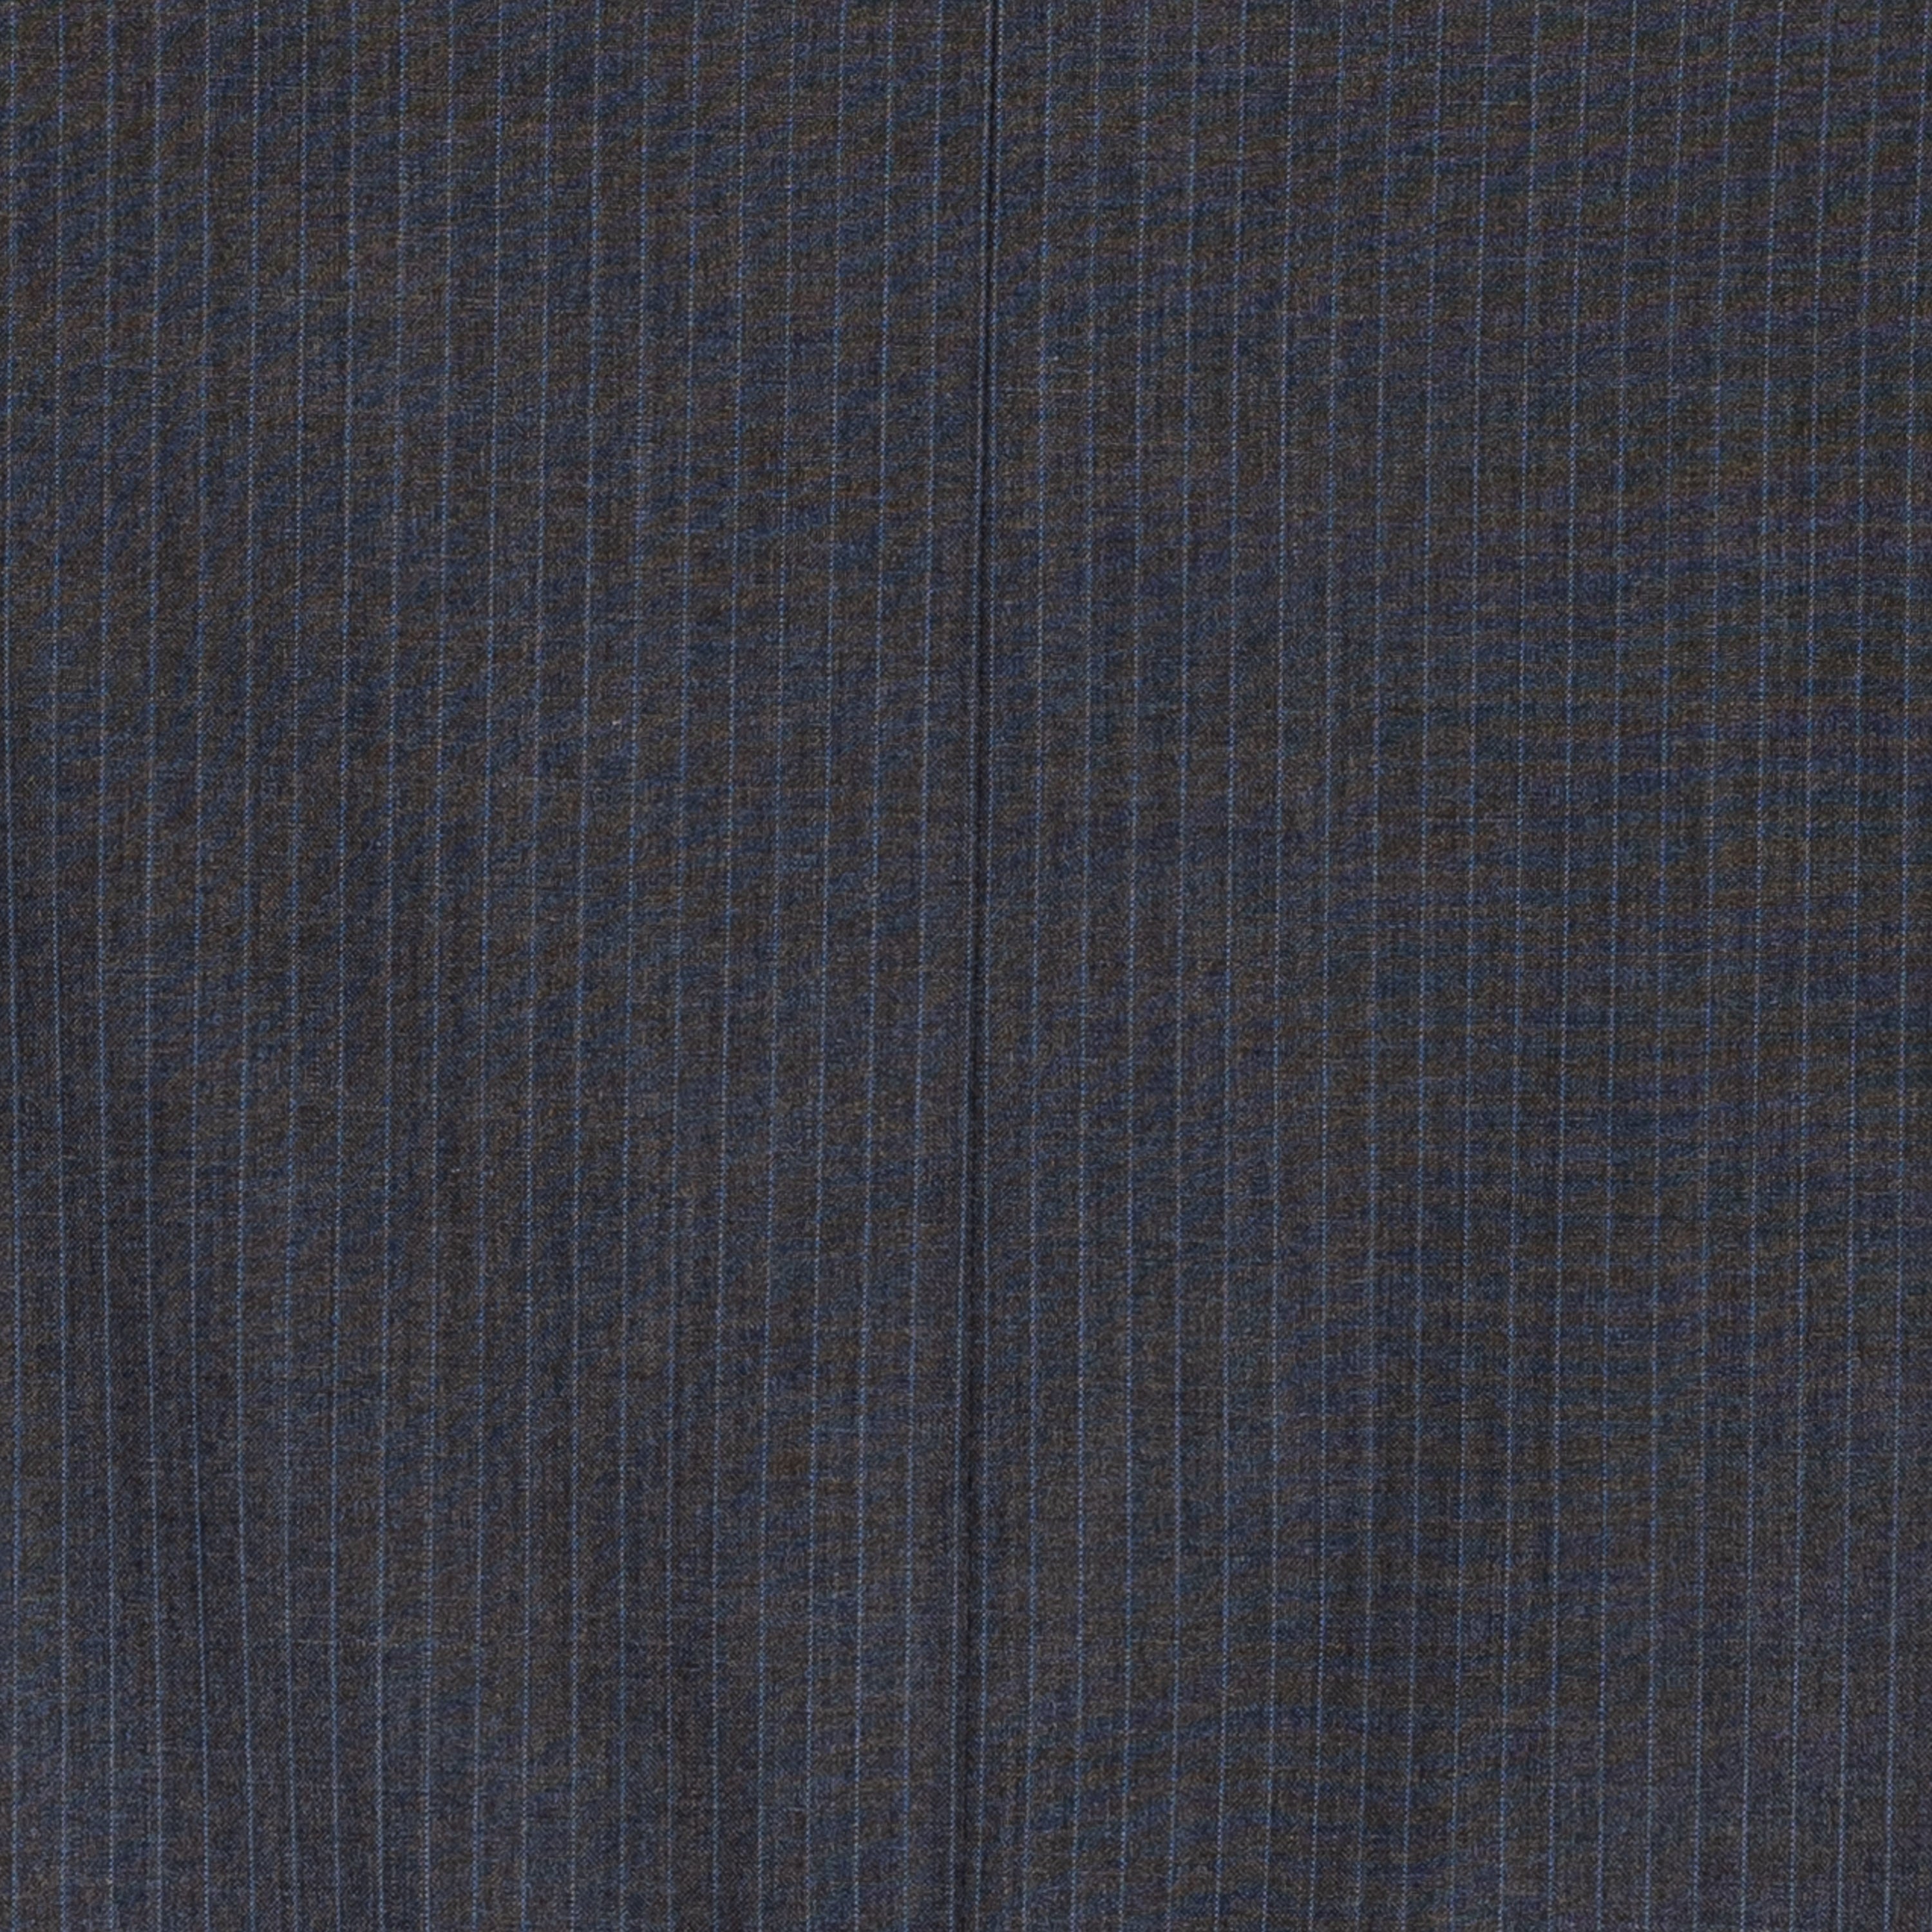 CASTANGIA 1850 Gray Striped Wool Suit EU 50 NEW US 40 CASTANGIA